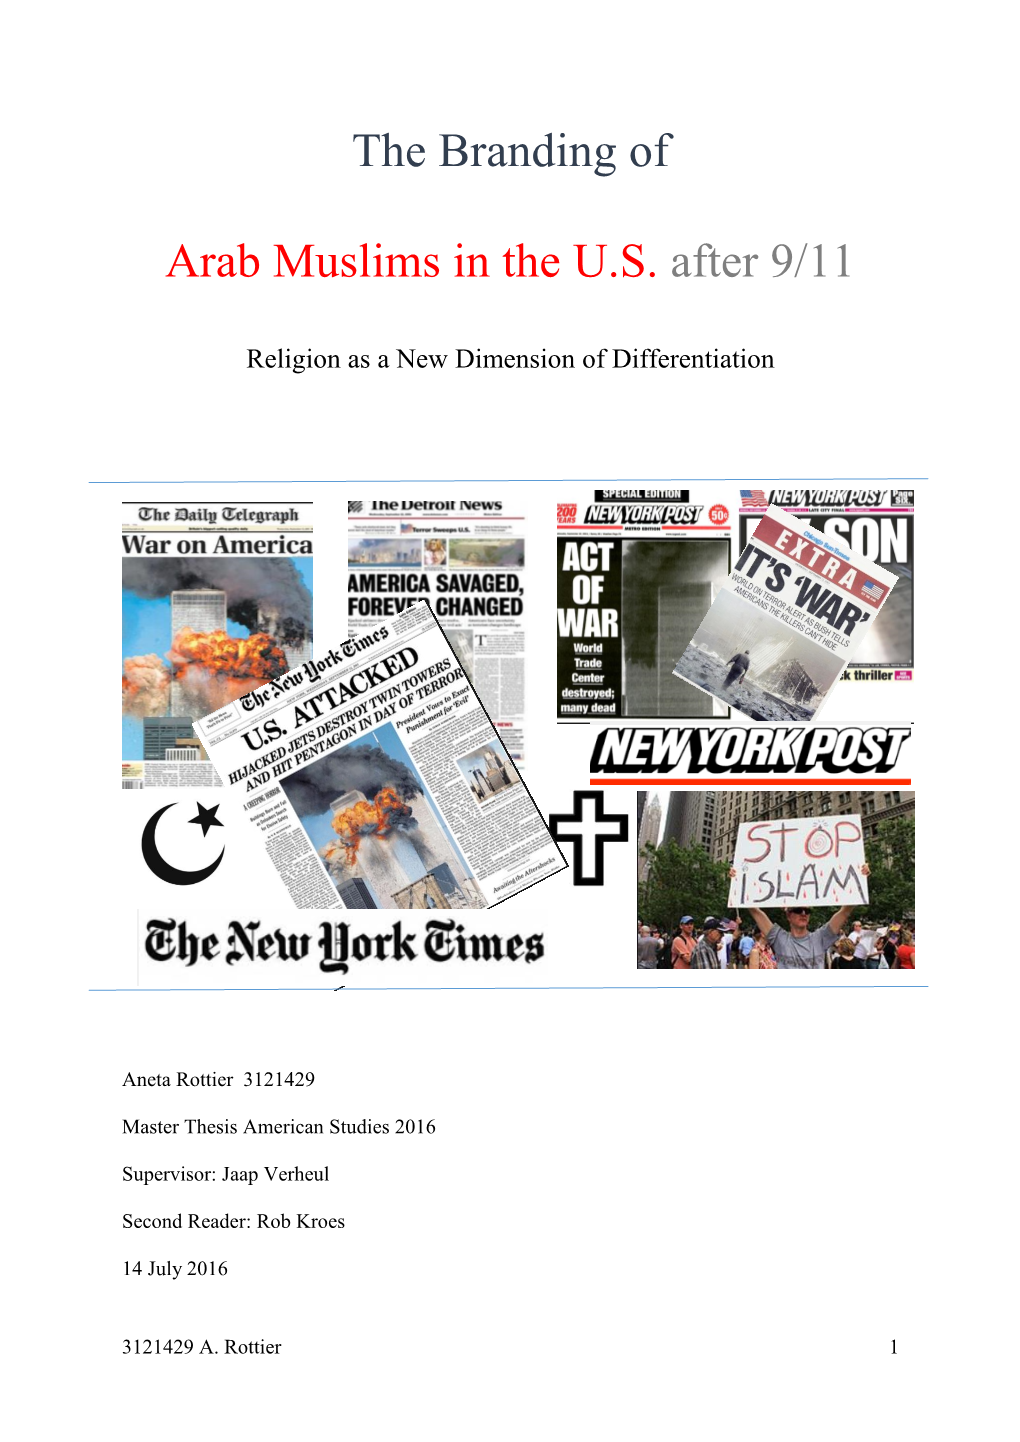 The Branding of Arab Muslims in the U.S. After 9/11